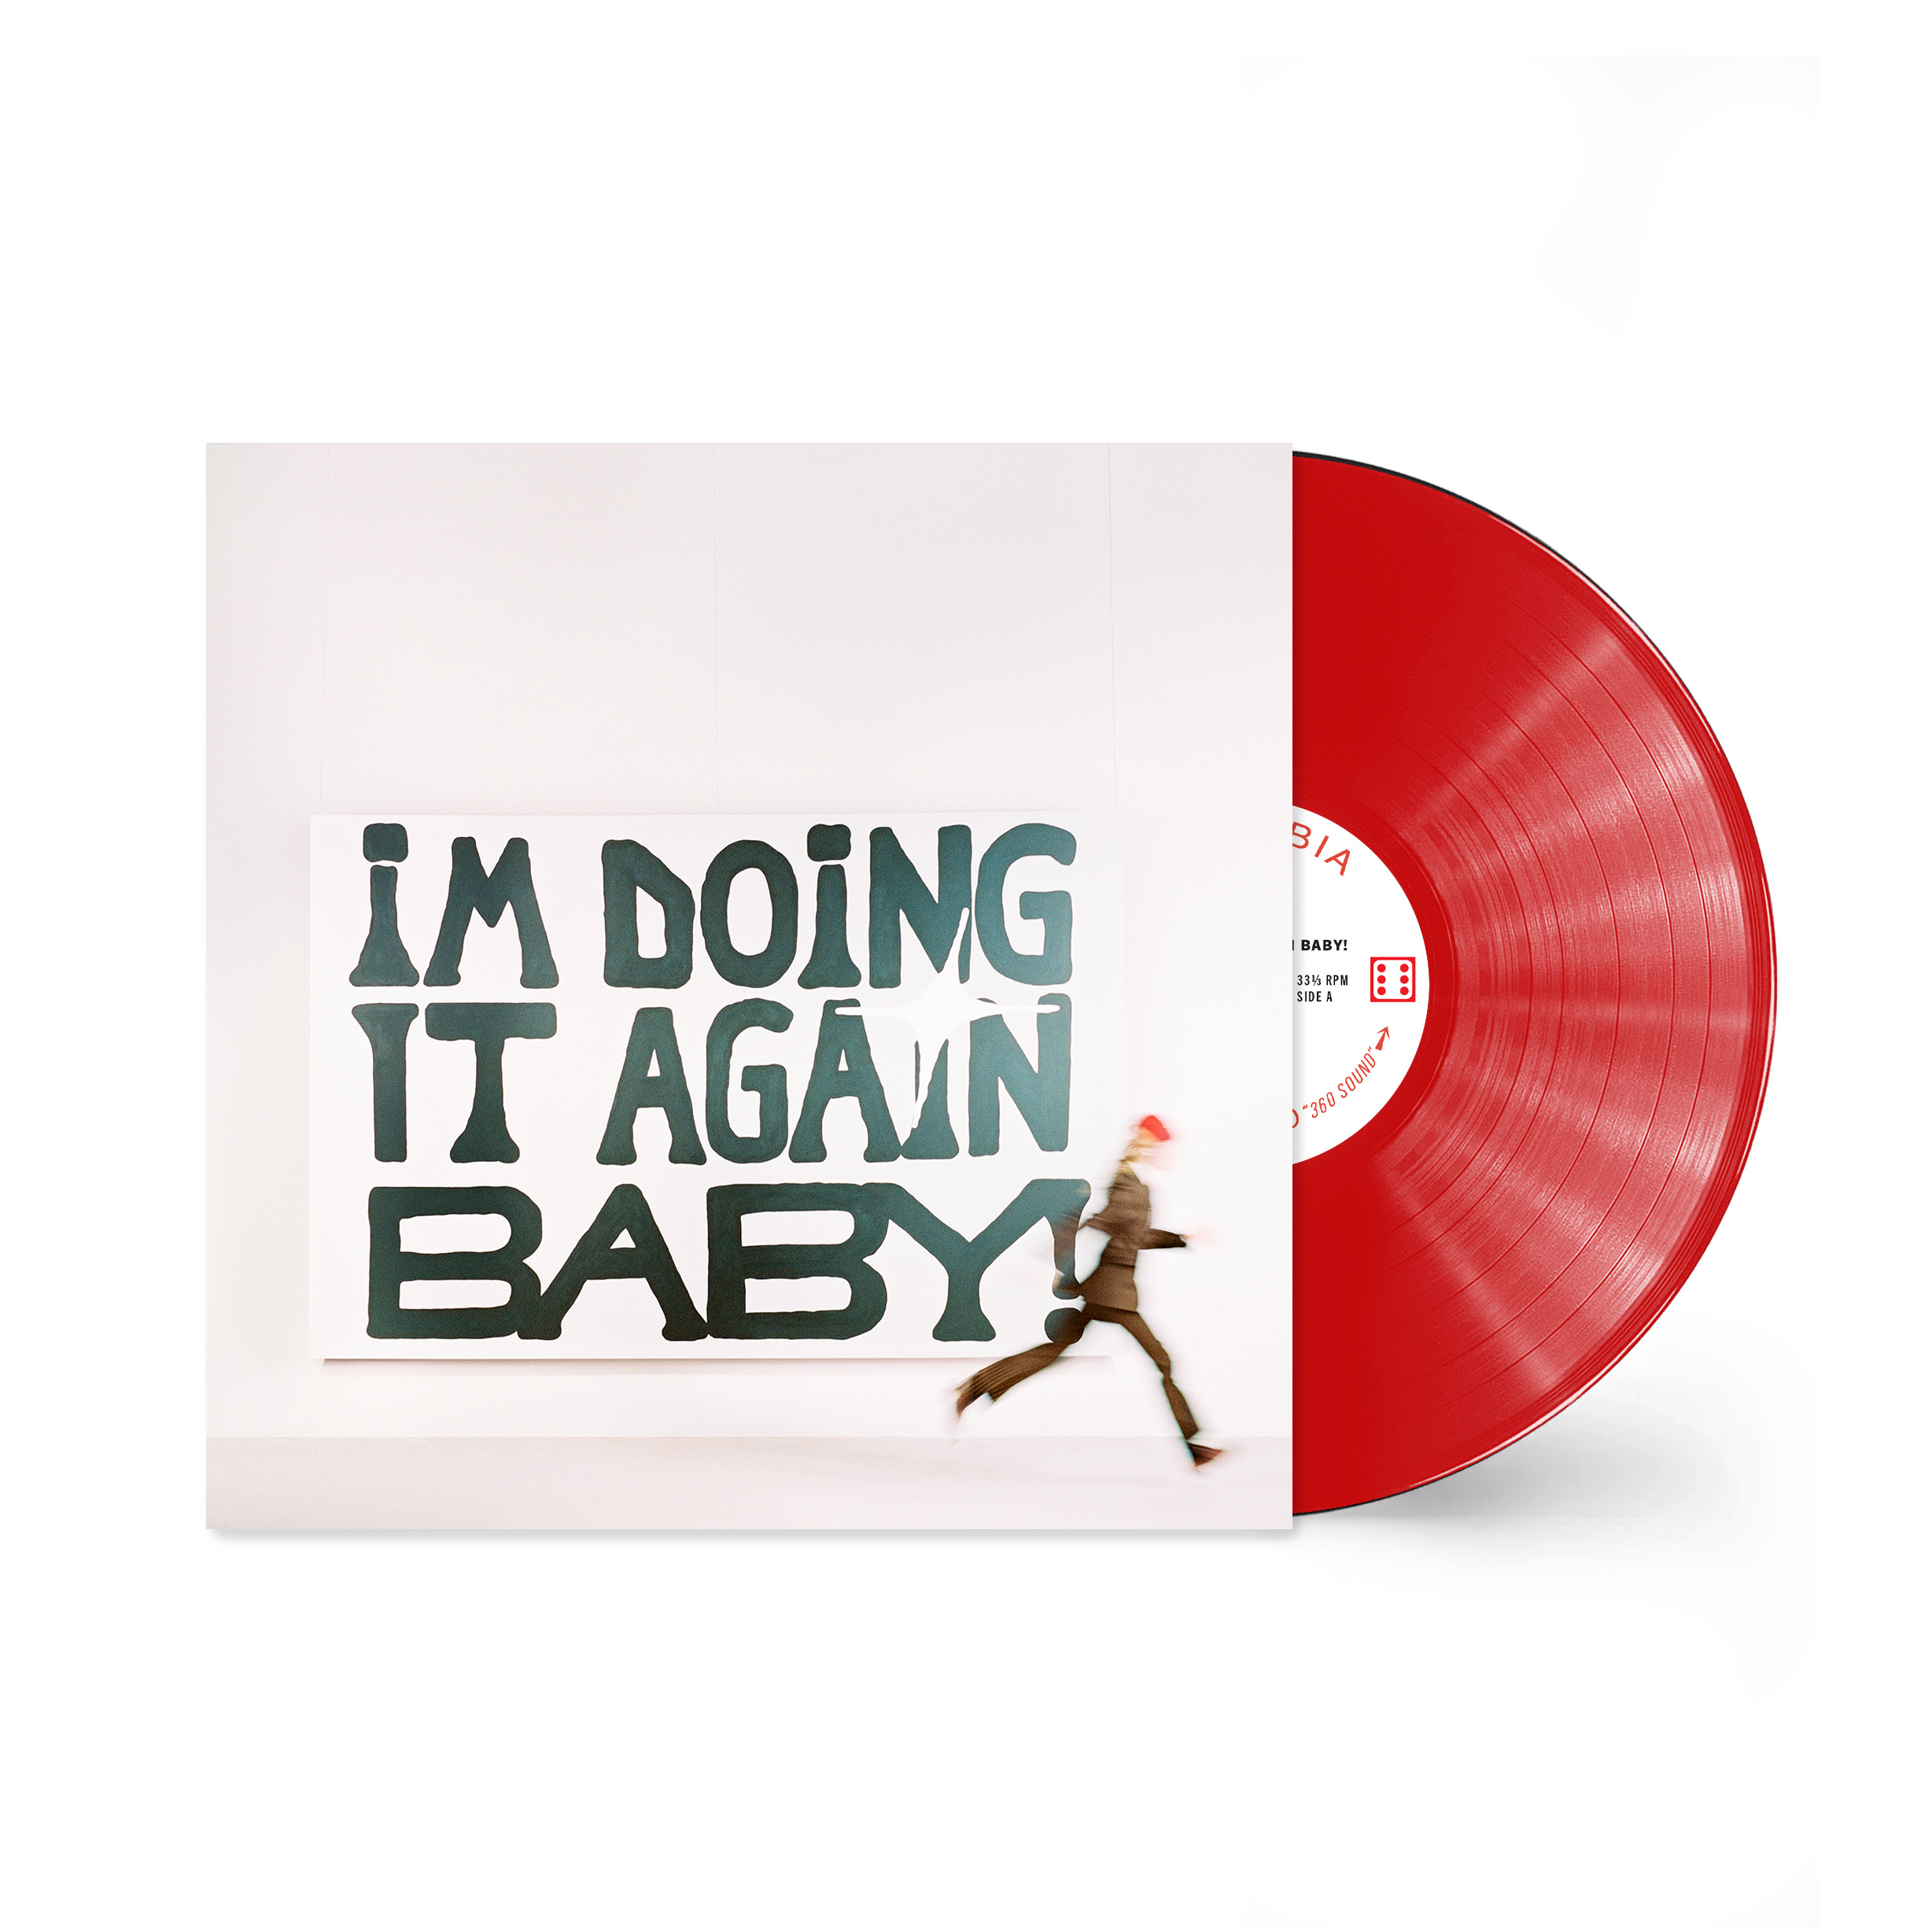 Girl In Red - I'm Doing it Again Baby! Limited Translucent Red Vinyl LP